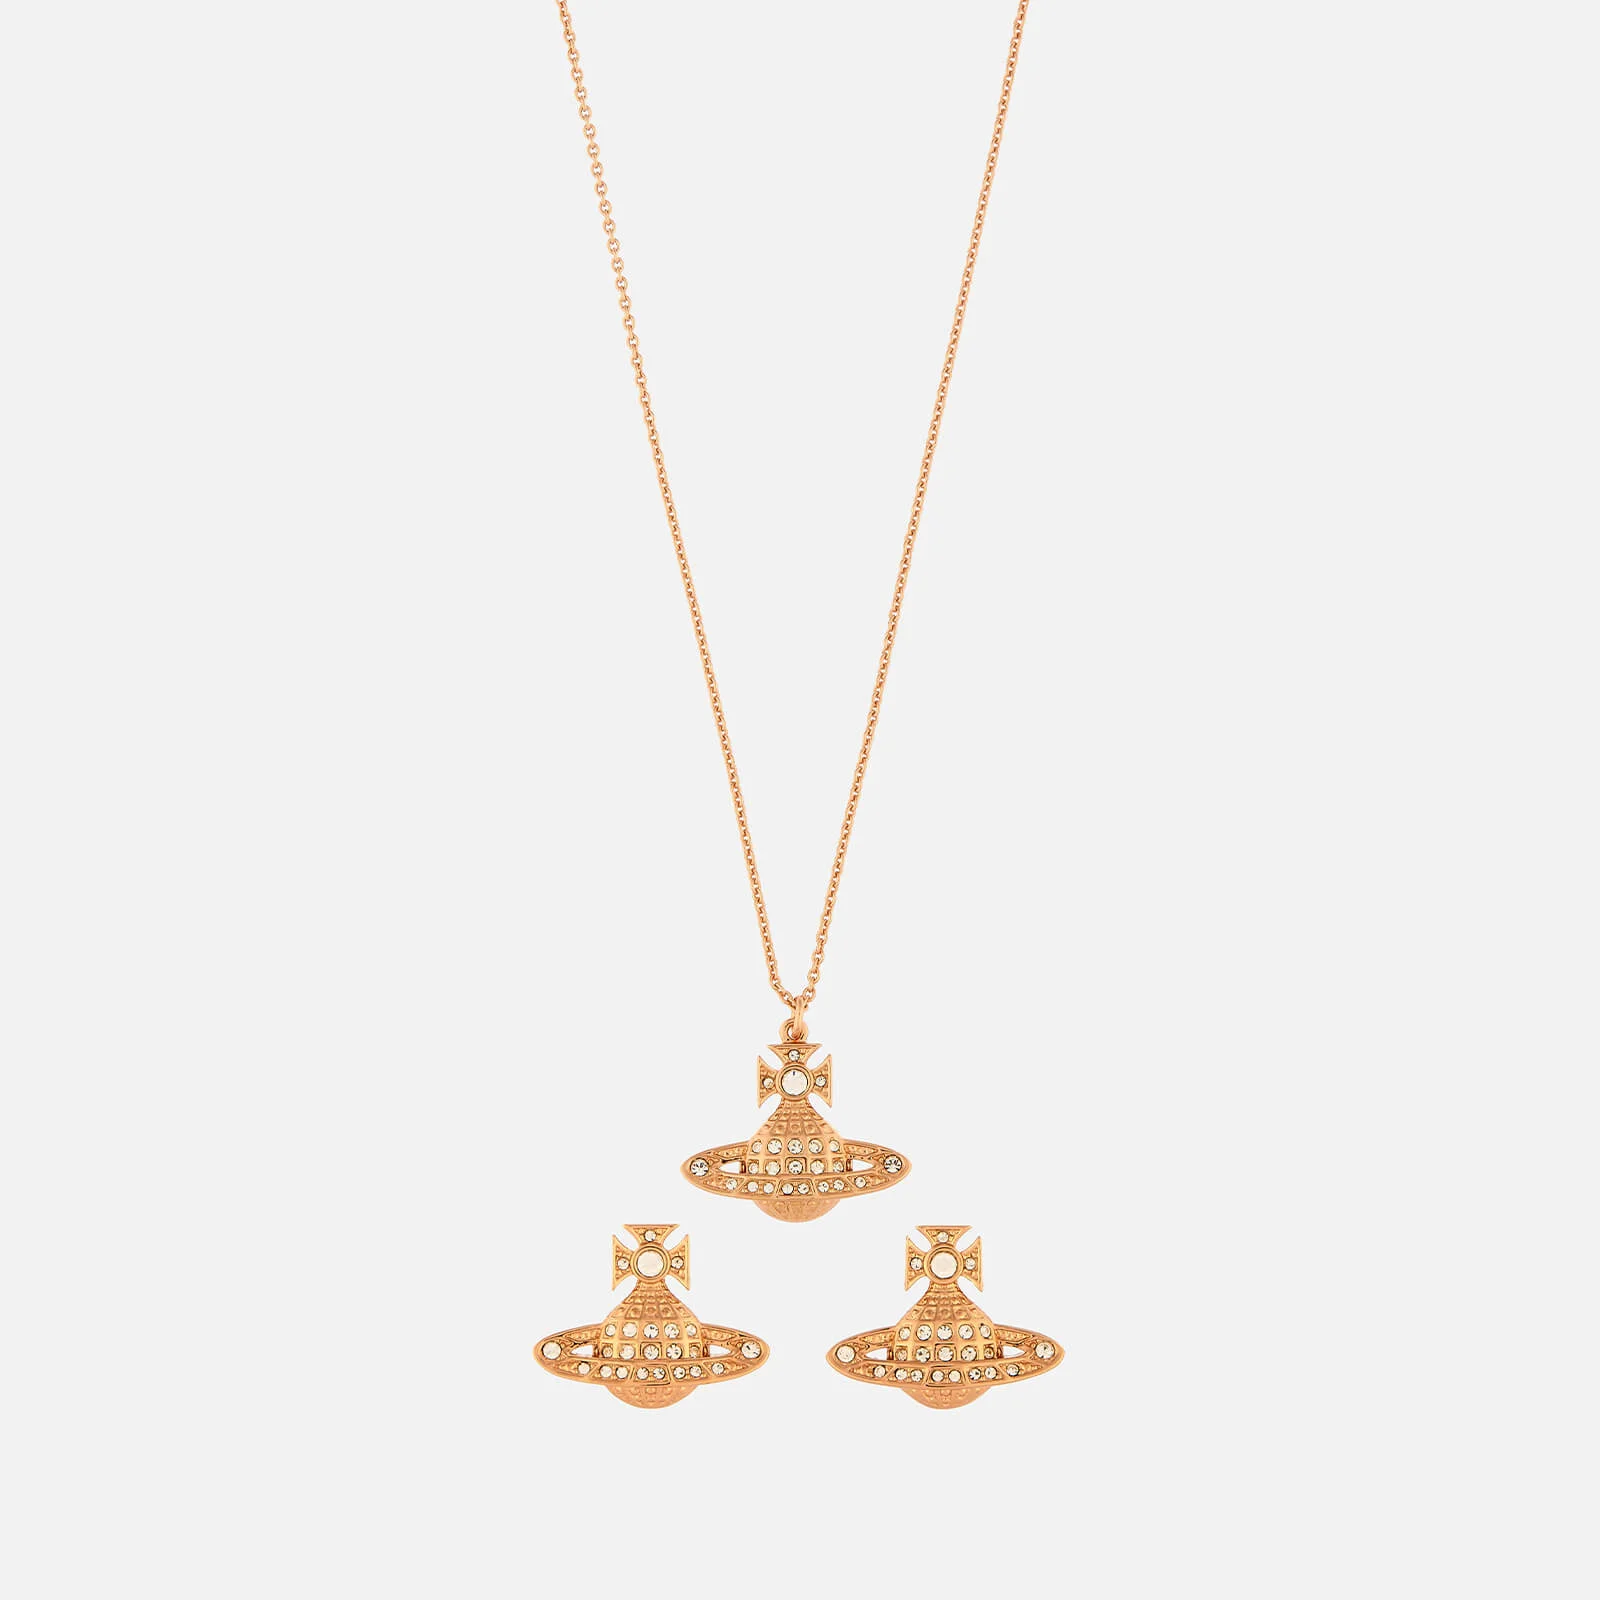 Vivienne Westwood Women's Minnie Bas Relief Pendant and Earrings Giftset - Crystal/Rose Gold Image 1